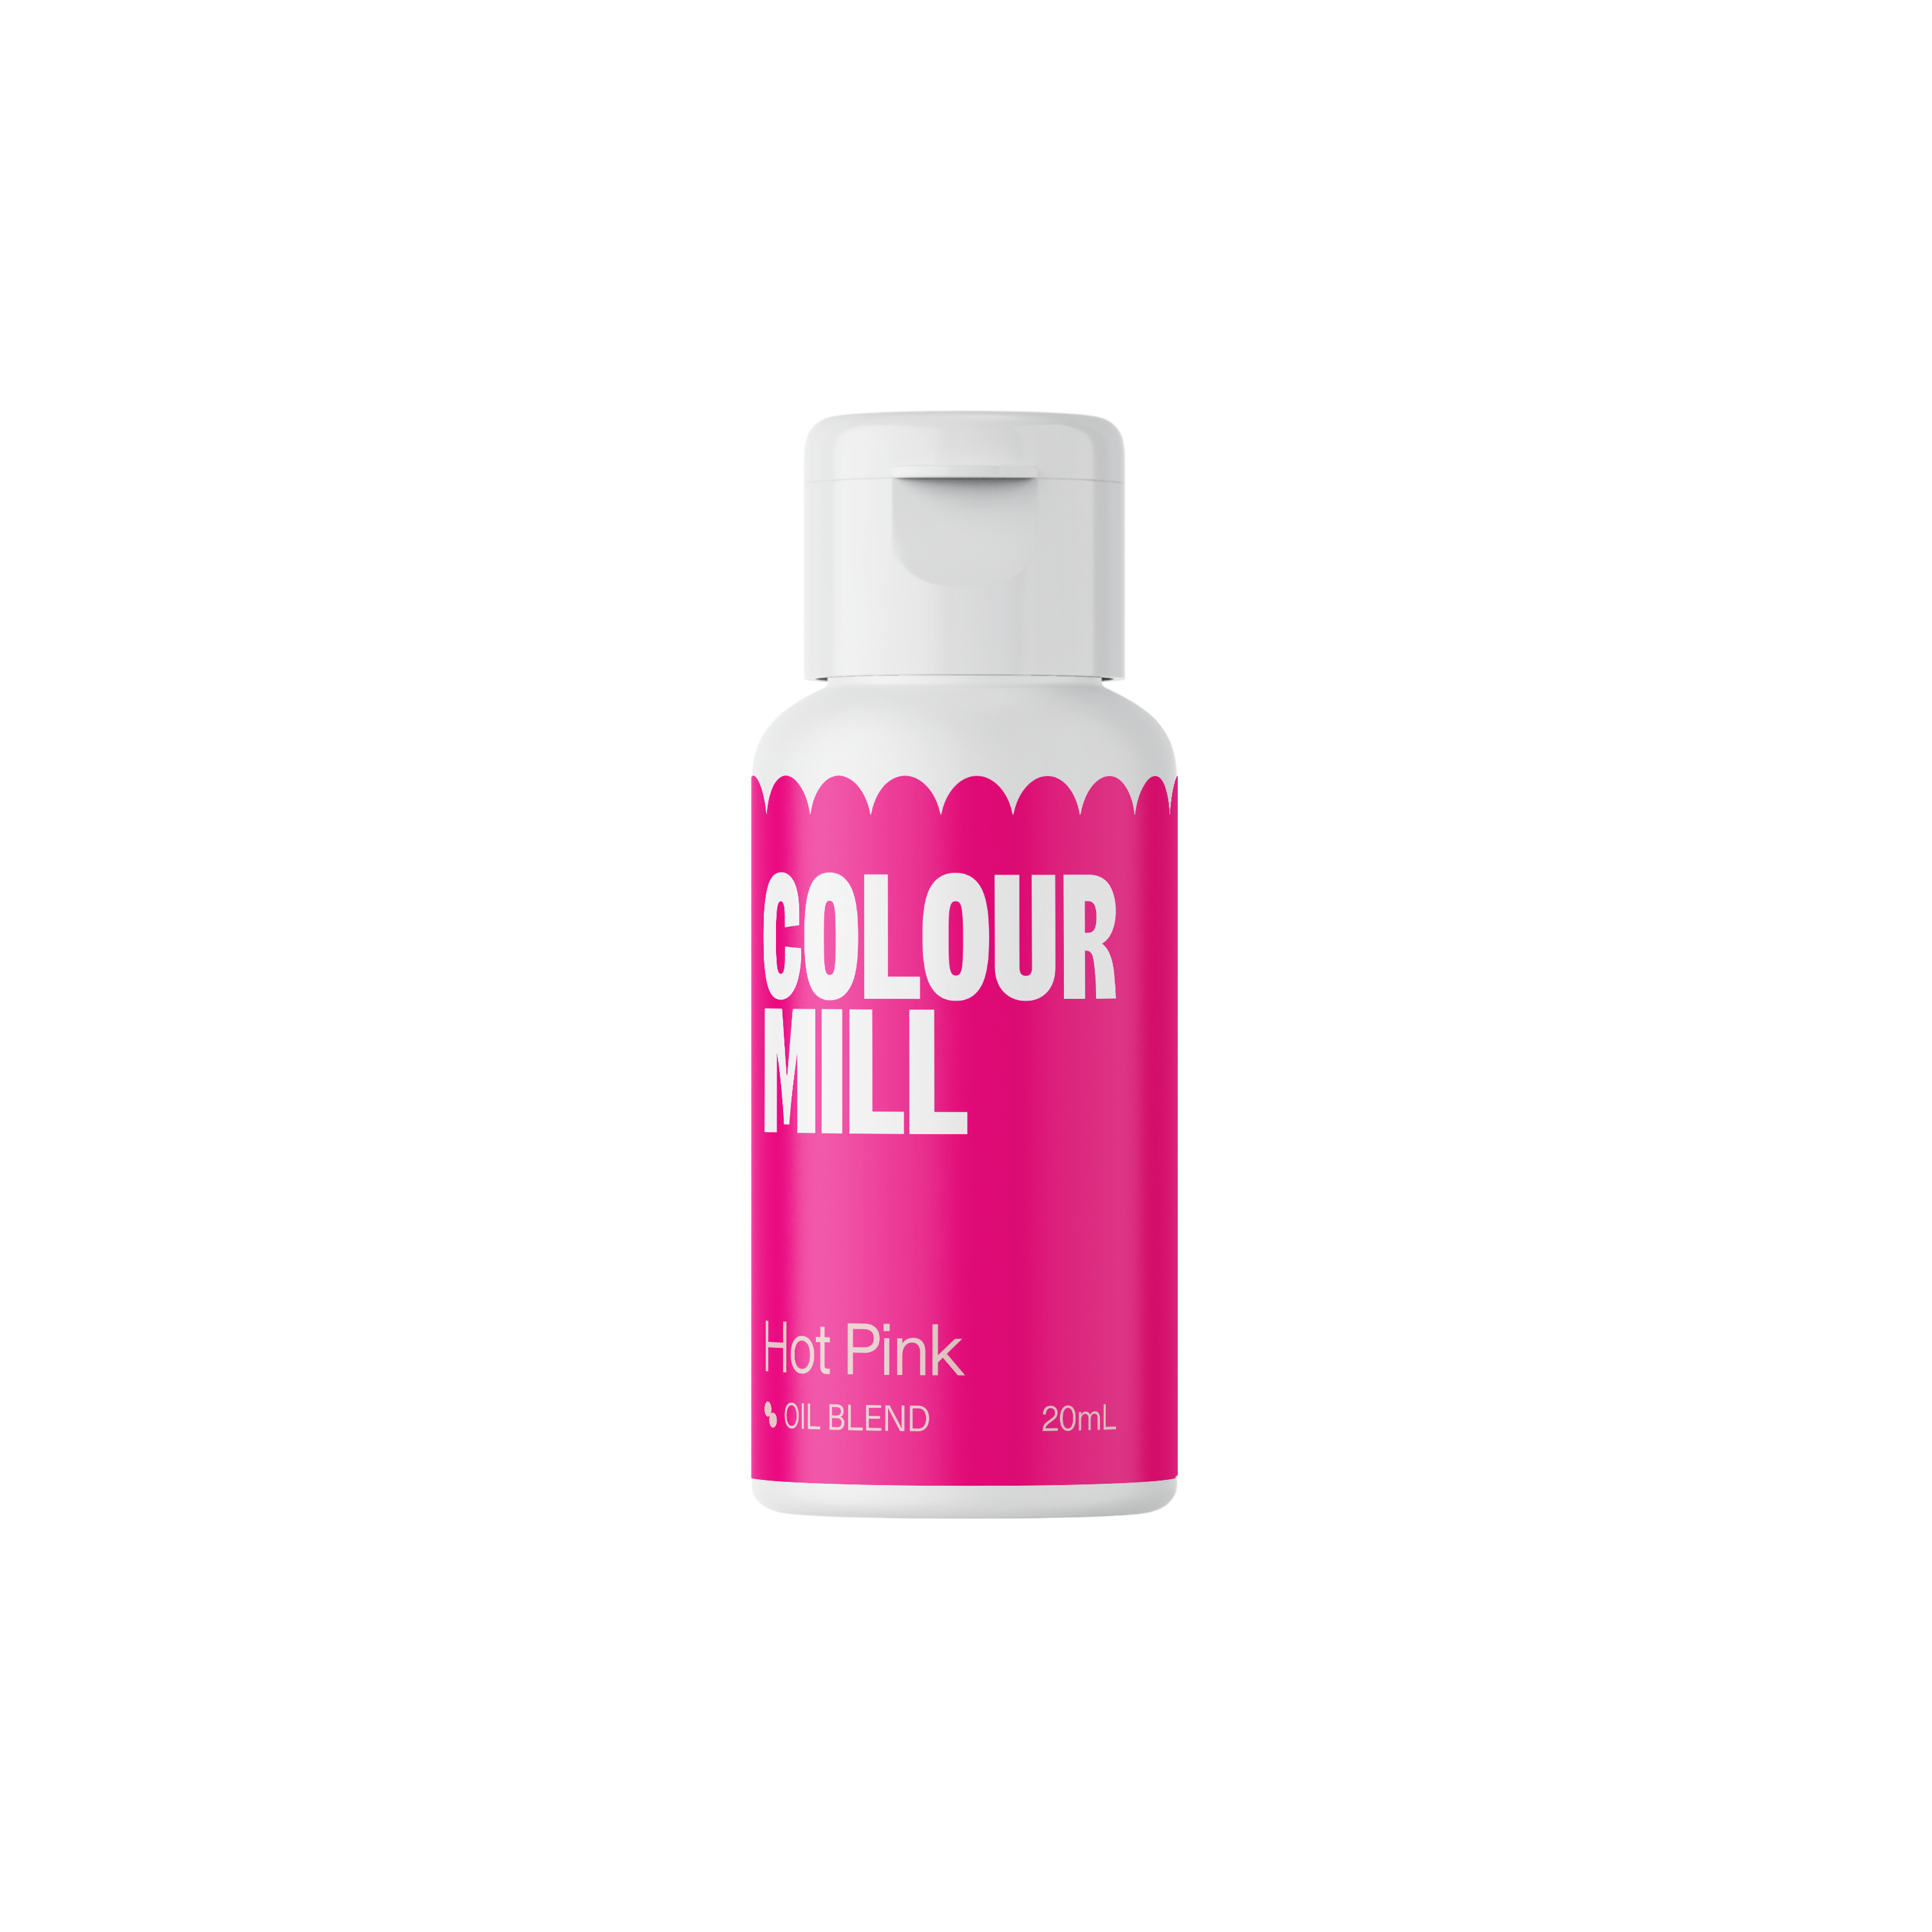 Hot Pink - Oil Blendproduct image